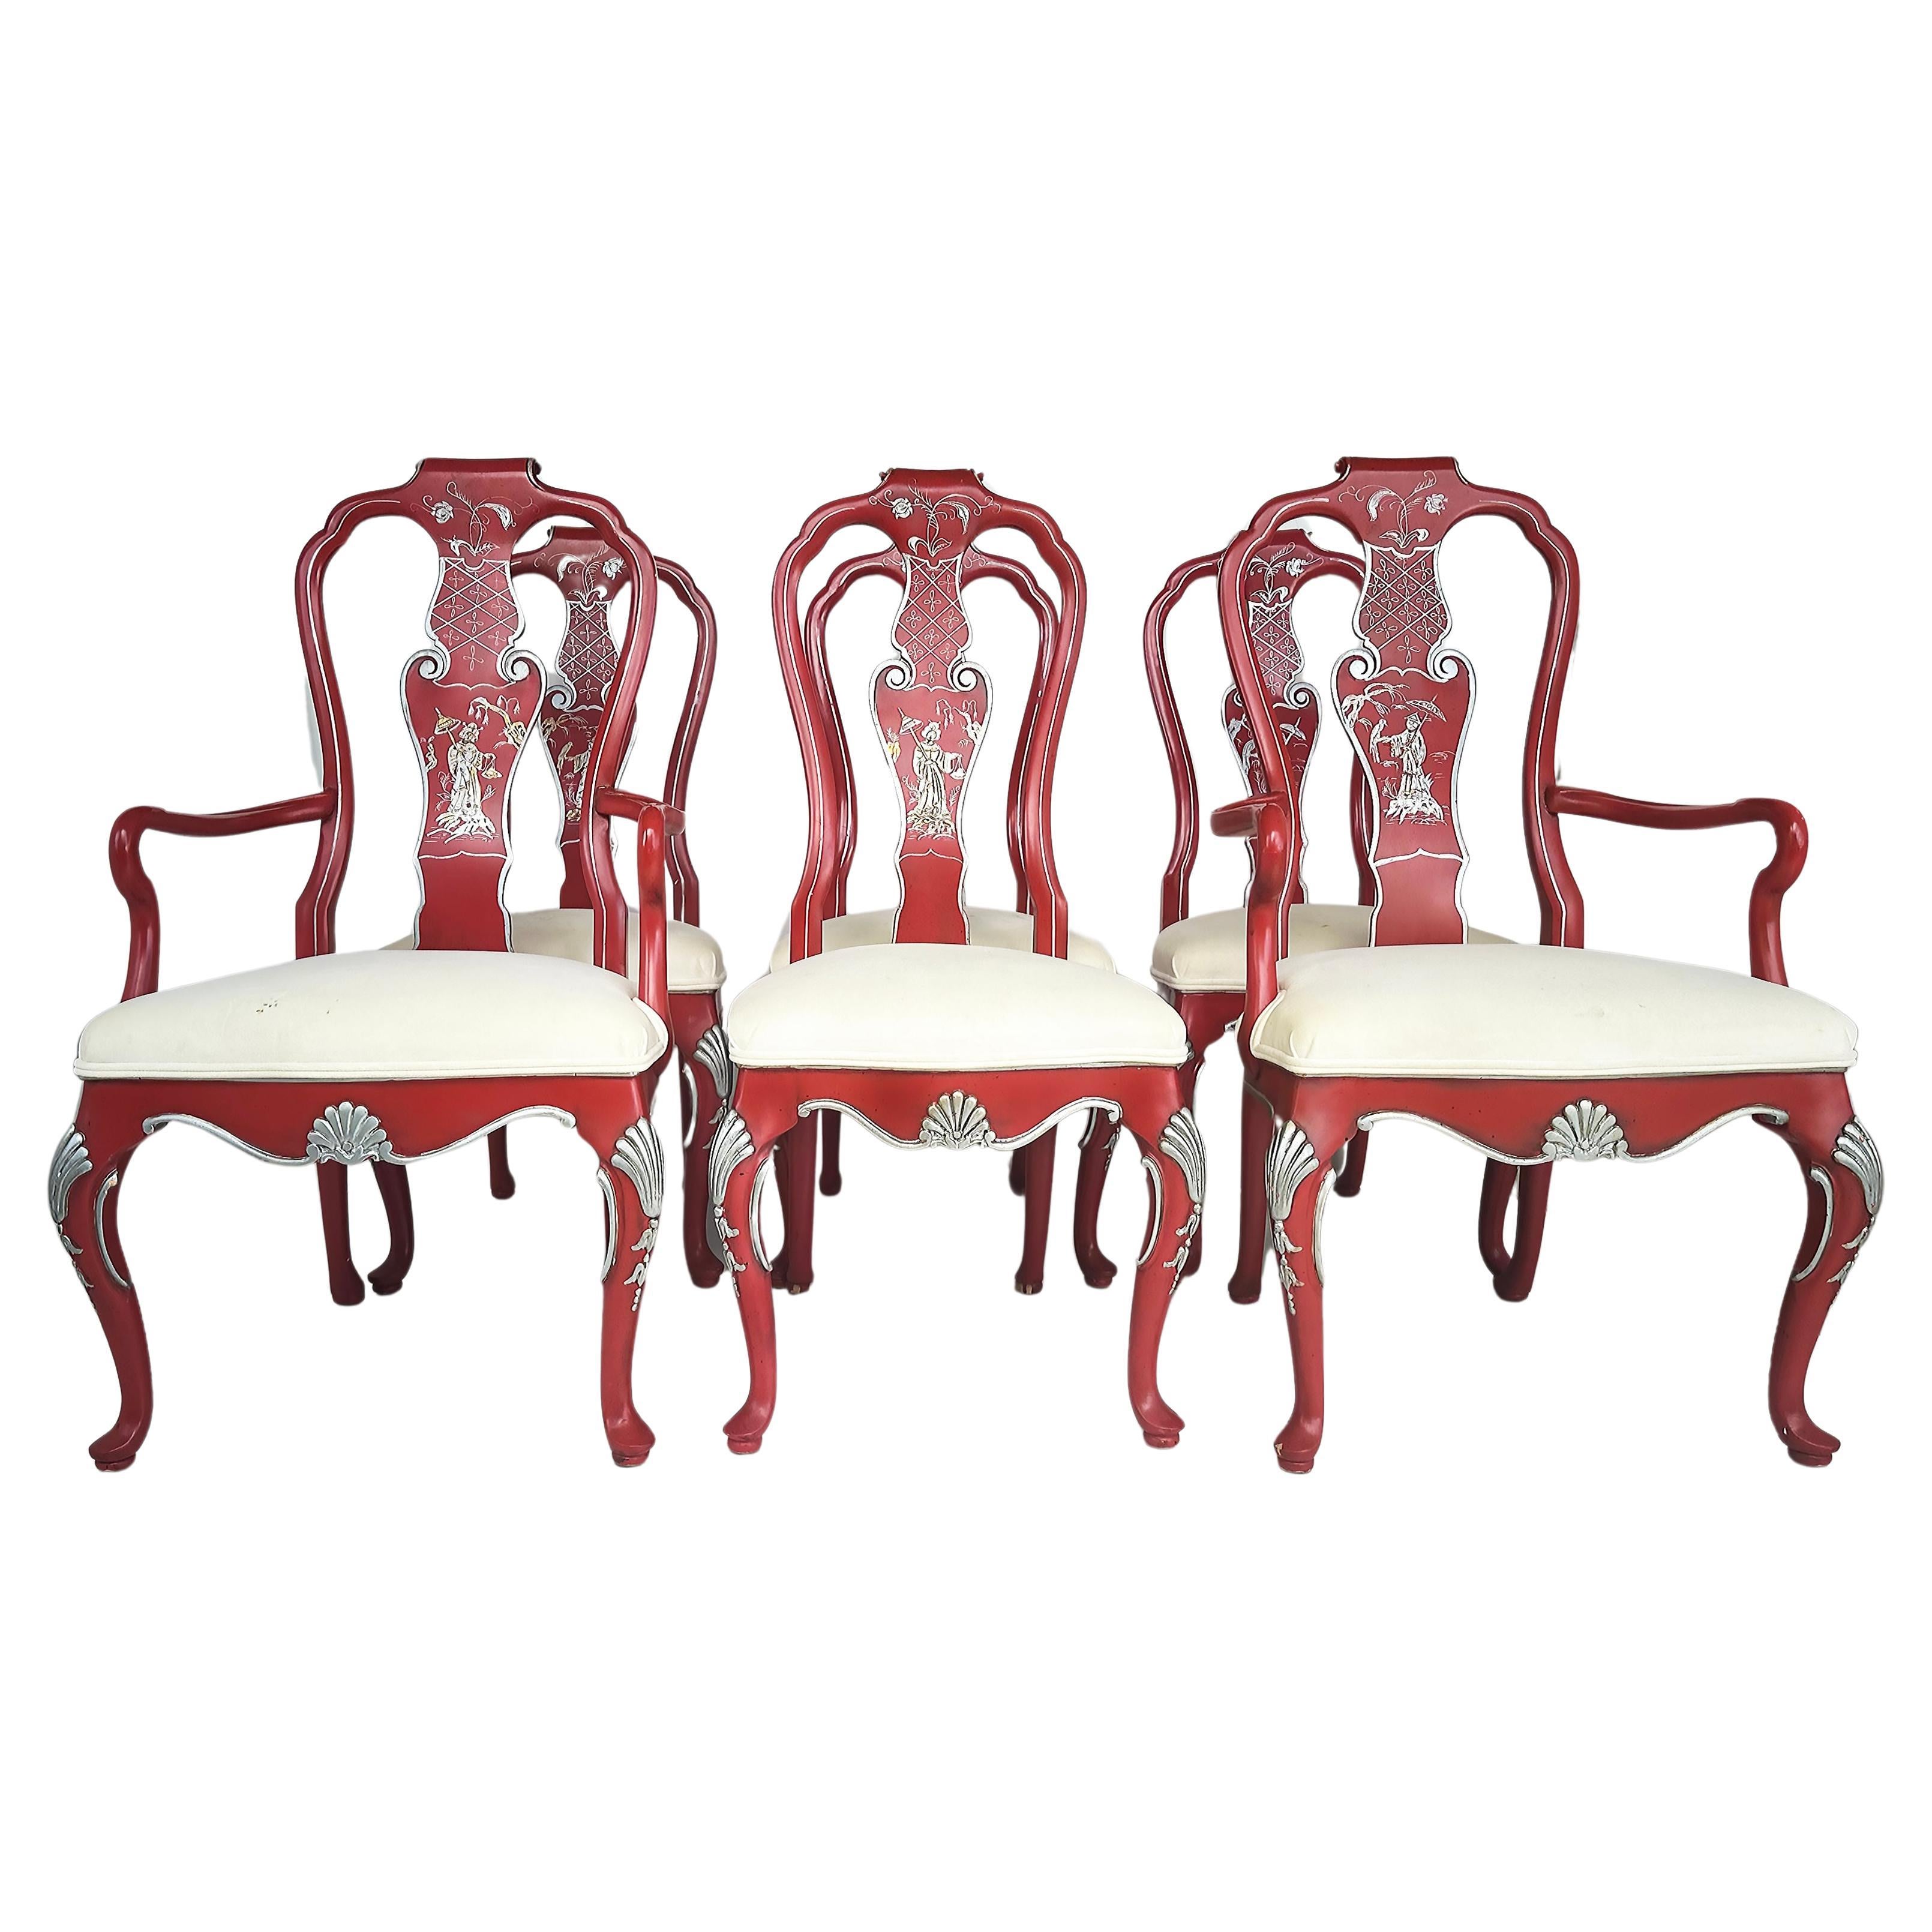 Vintage Chinoiserie Silver Leaf Dining Chairs, Set of 6, 2 Armchairs, 4 Sides